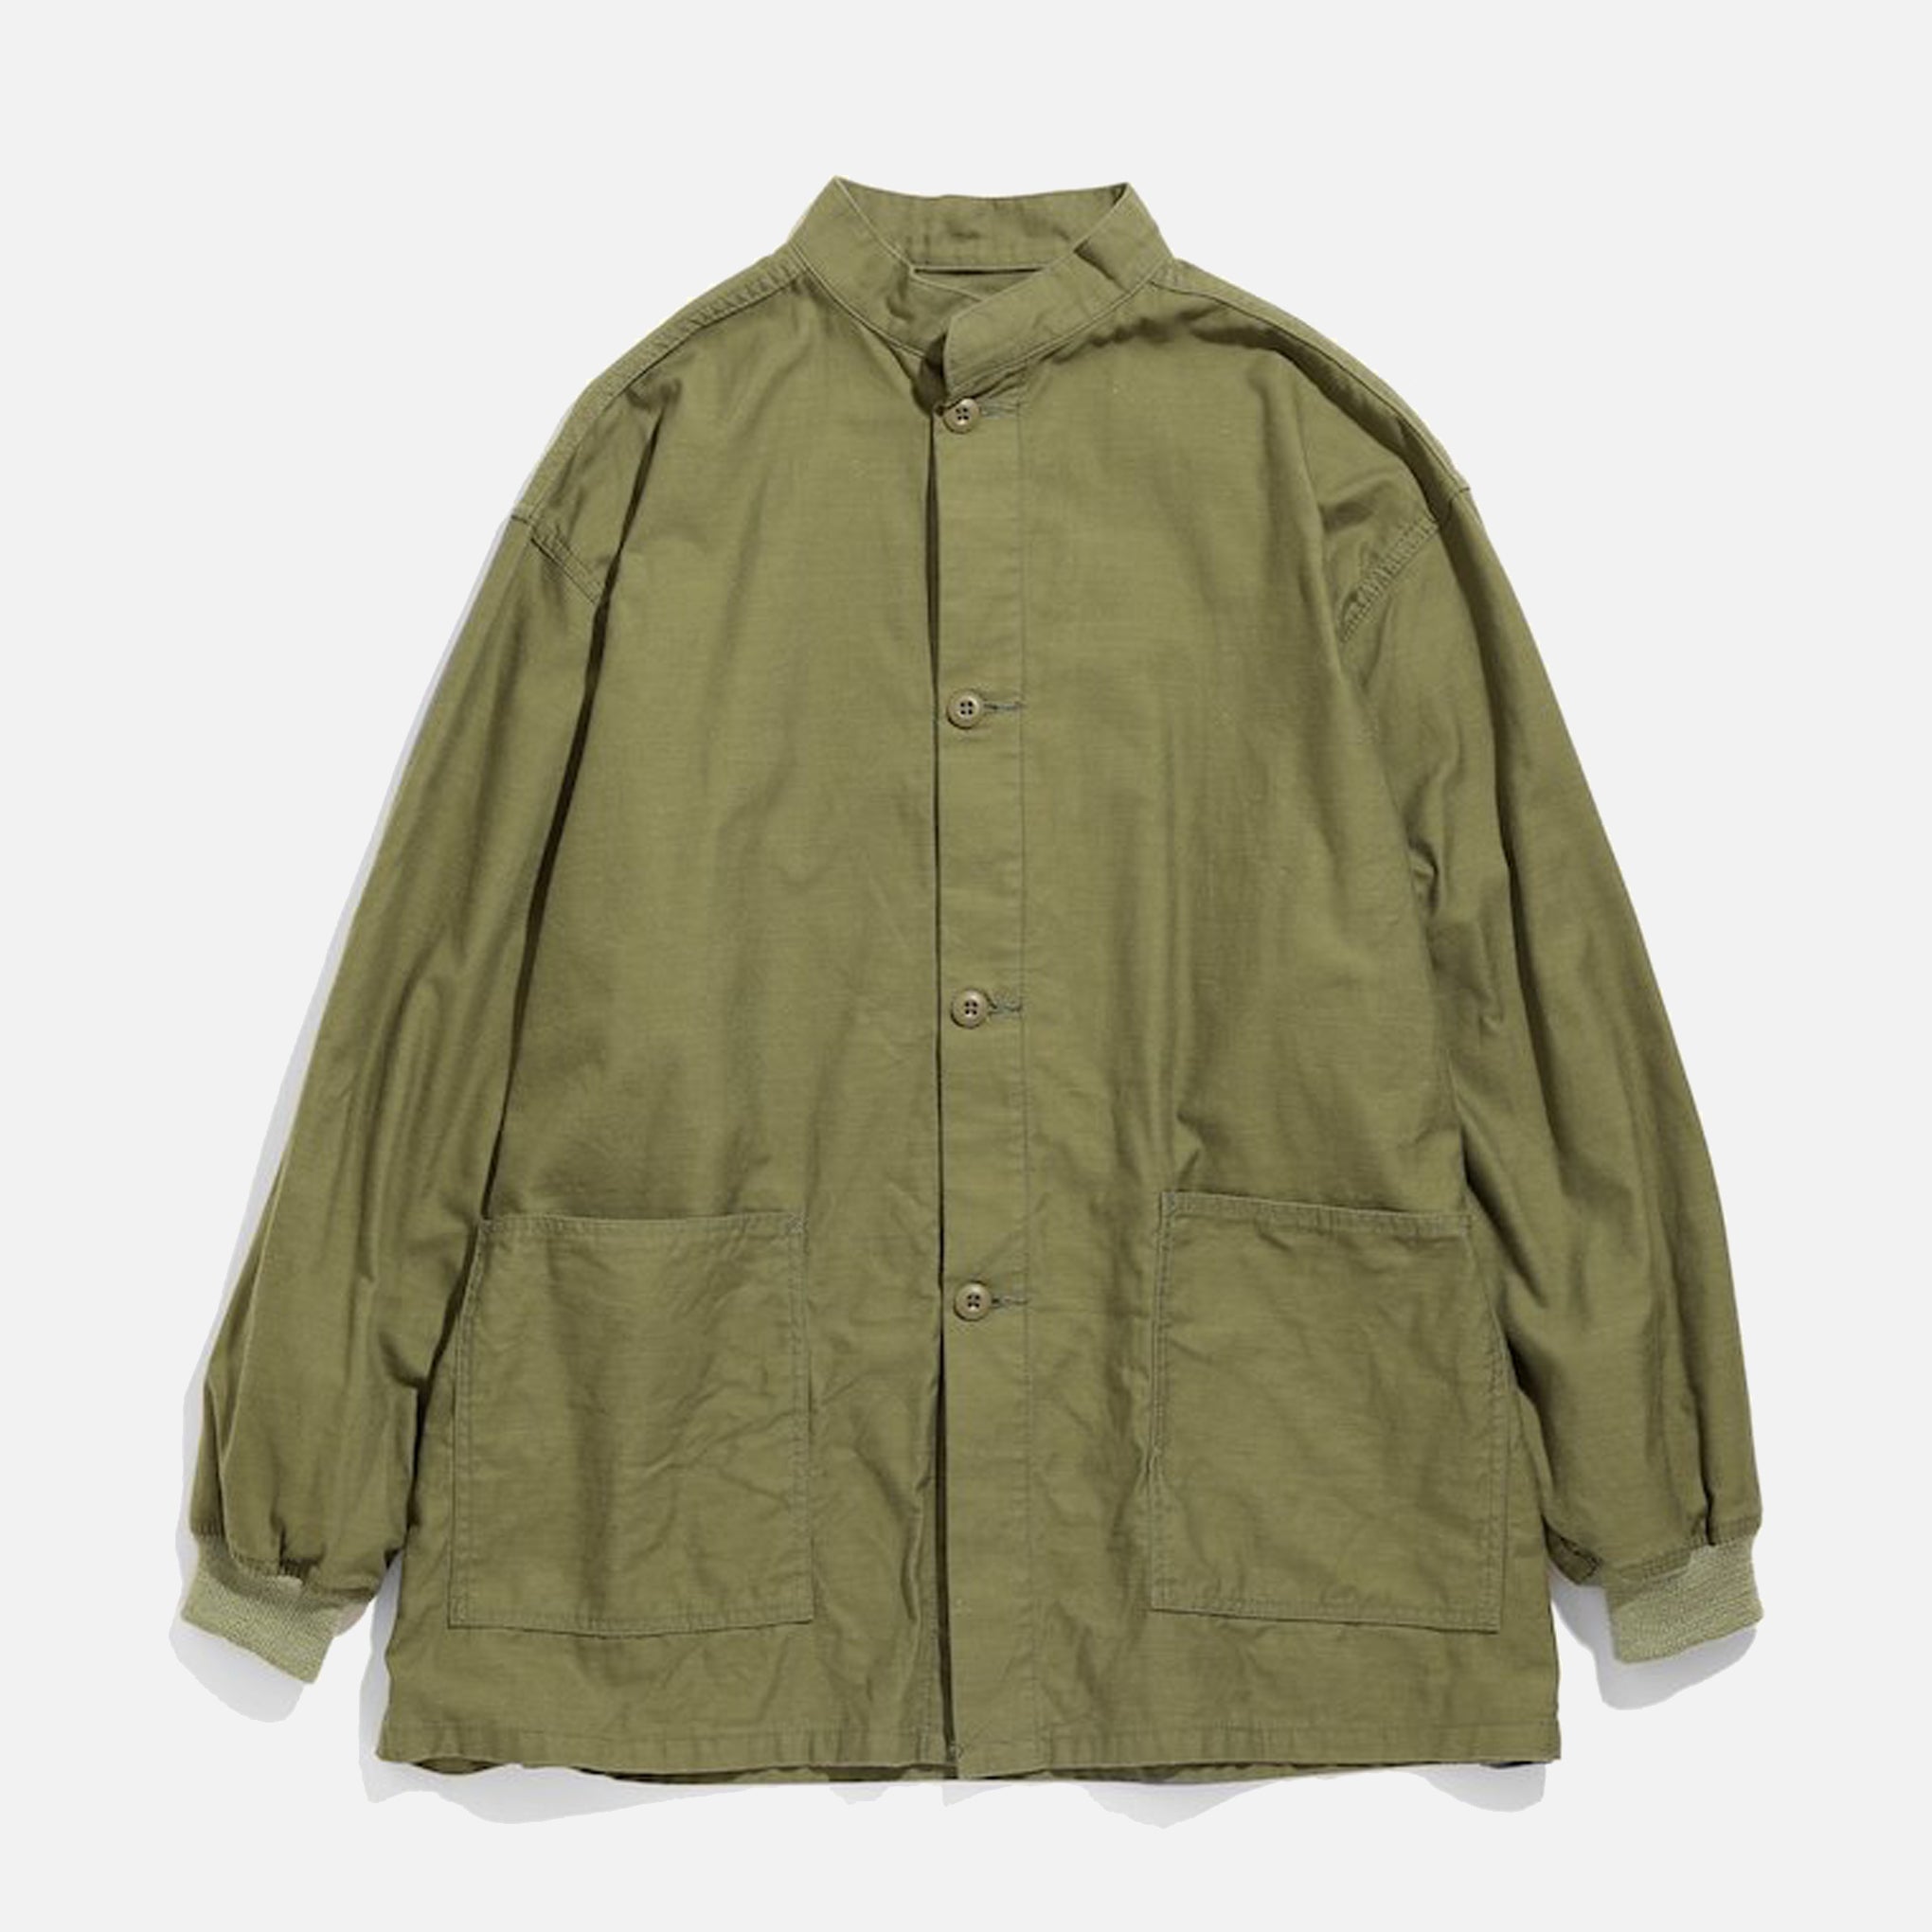 Needles S.C. Army Shirt - Olive Back Sateen